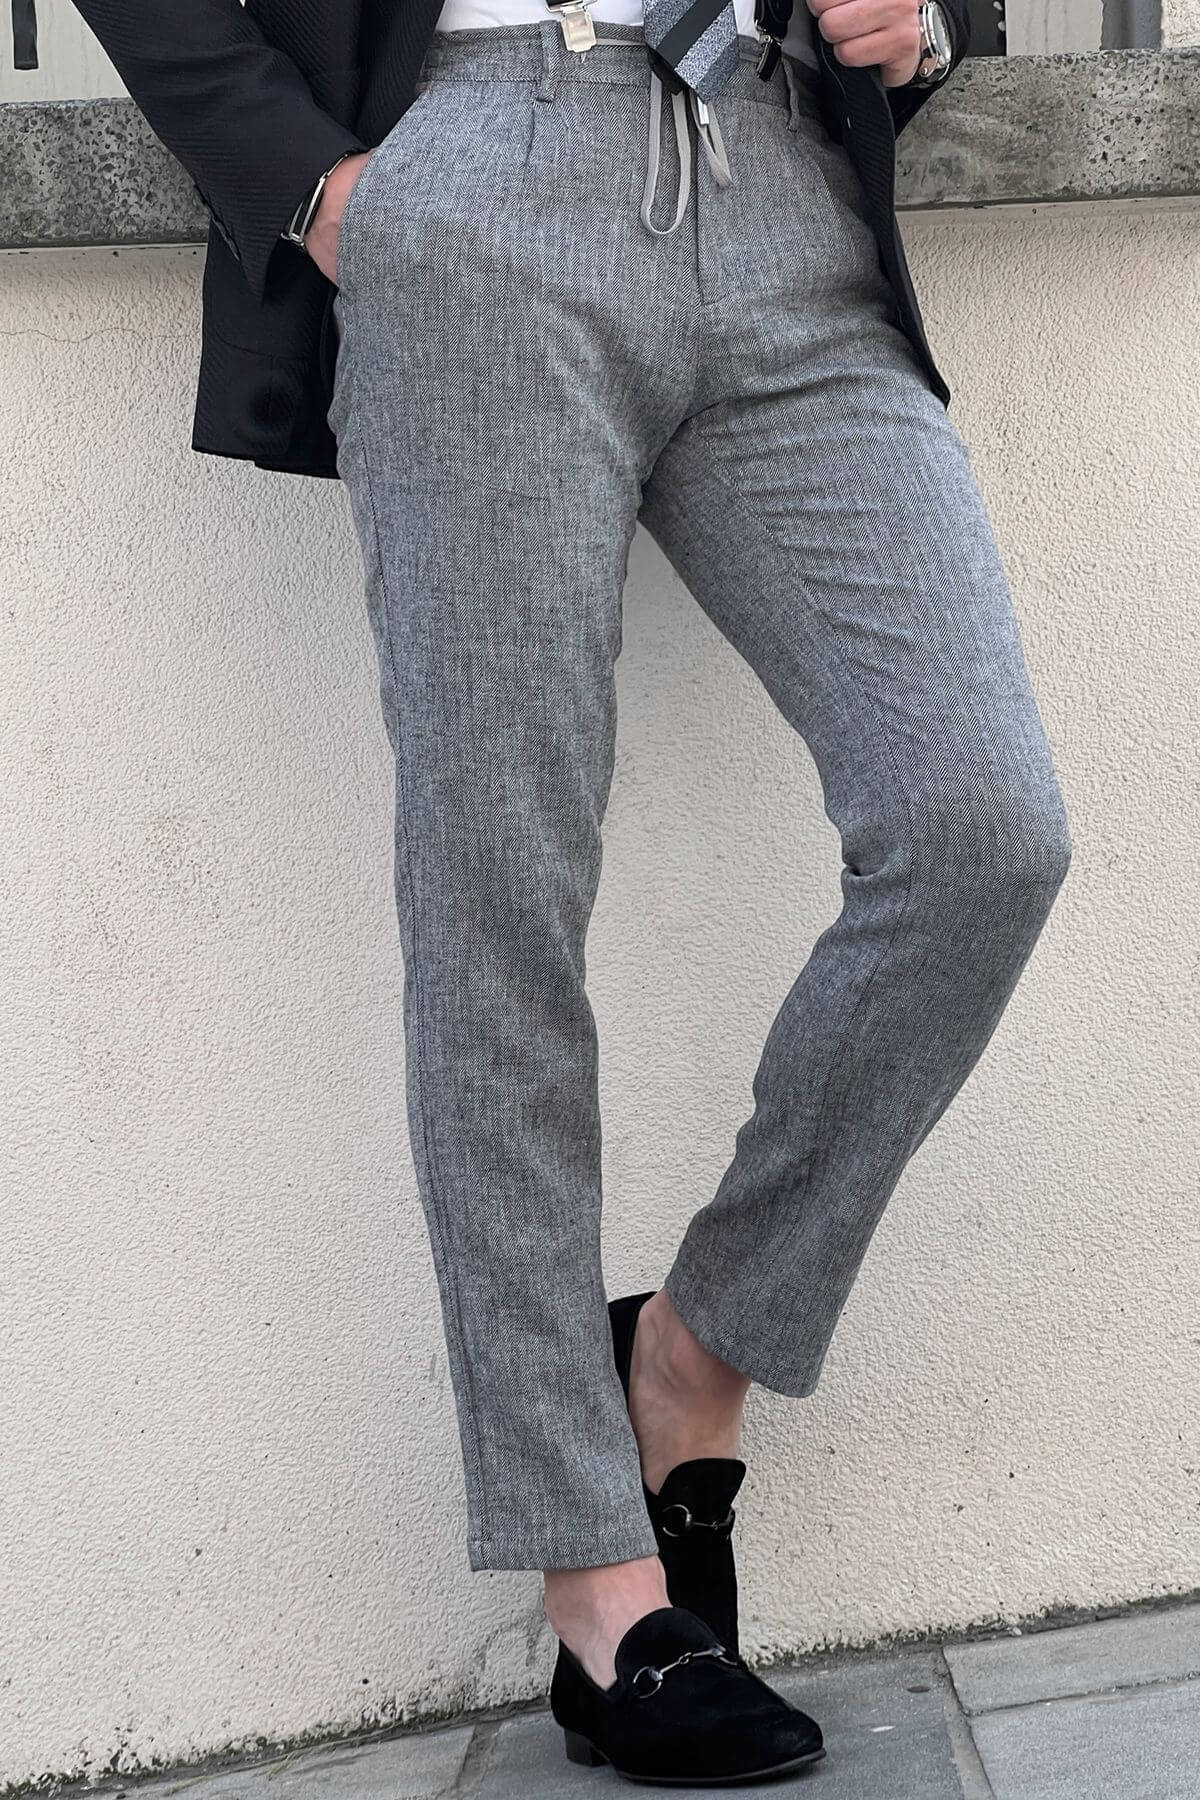 A Slim Fit Beige Gray Trouser on display